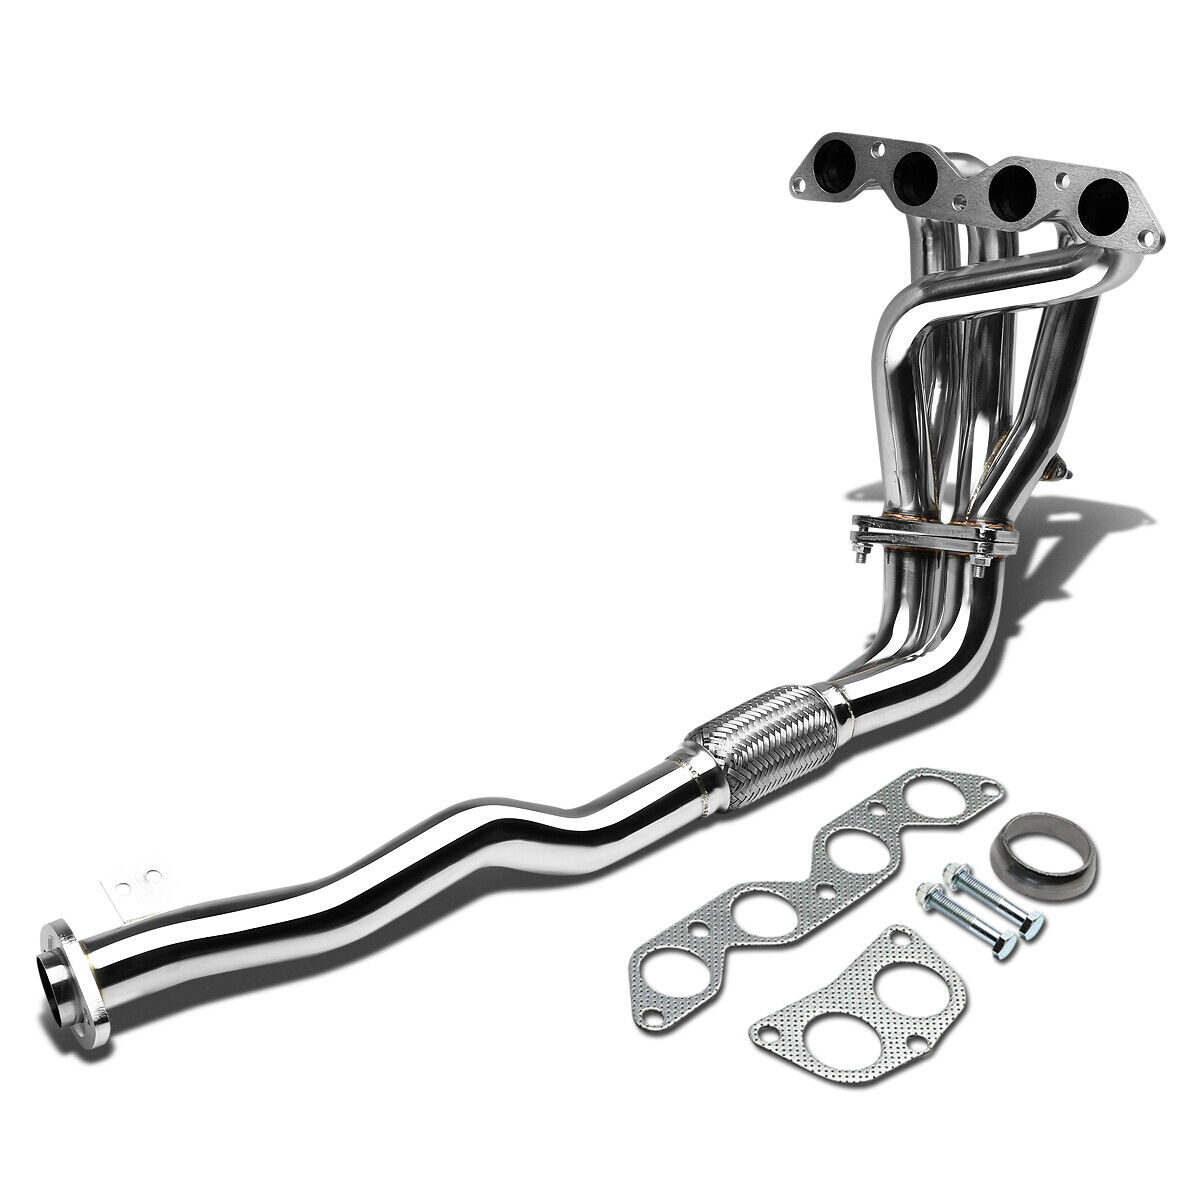 FOR TOYOTA COROLLA E100/AE102 1.8L STAINLESS STEEL FLEX EXHAUST PIPE HEADER